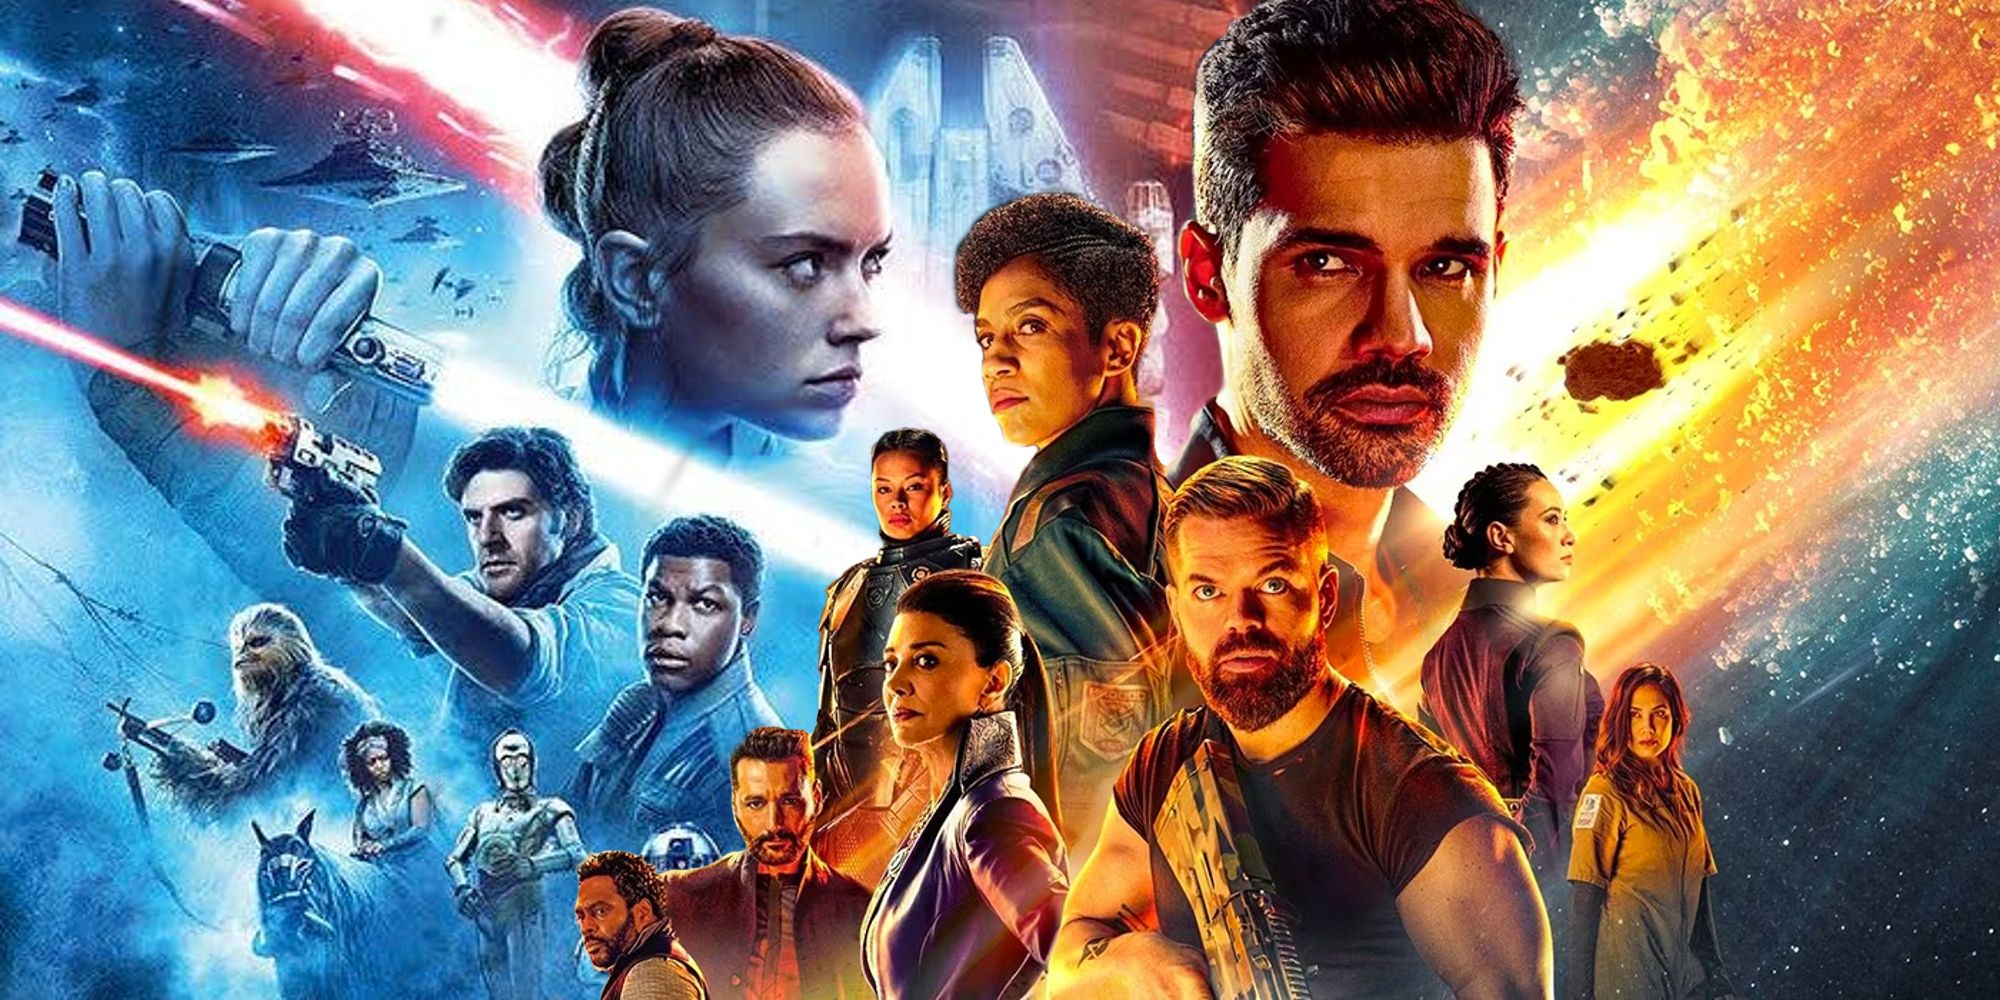 graphic merging the Star Wars sequel trilogy characters with The Expanse characters